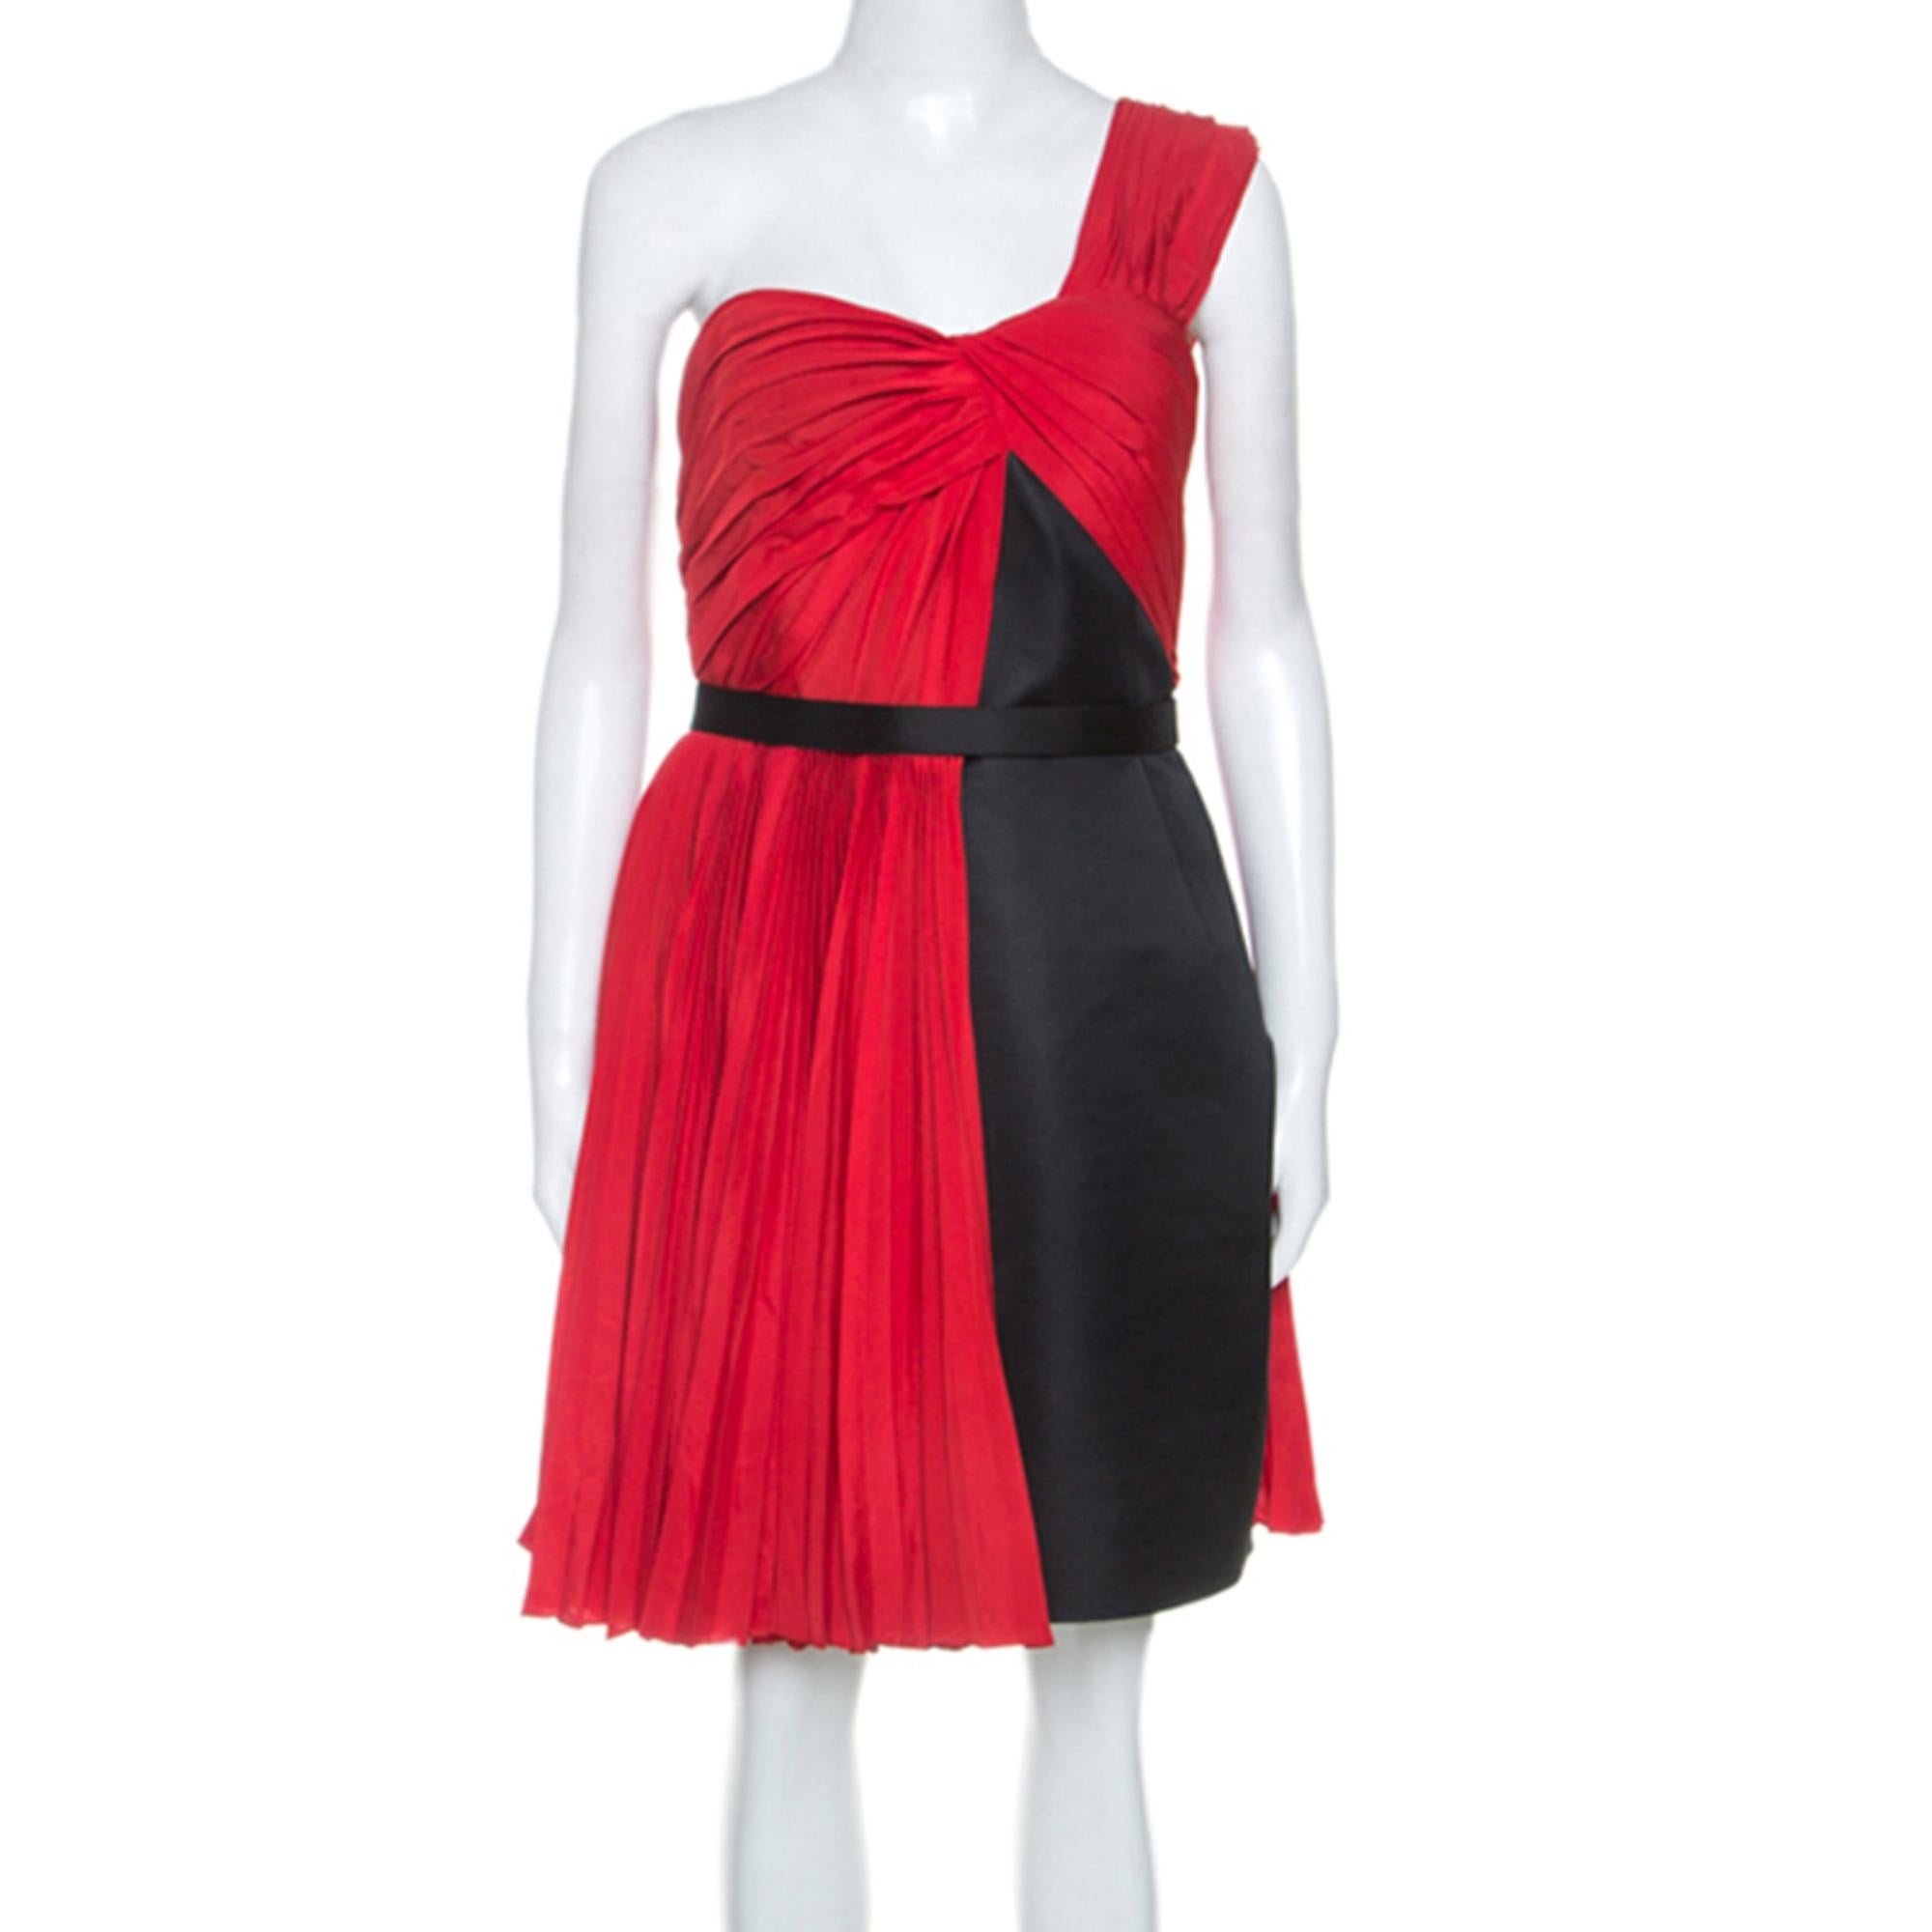 A Jason Wu dress like this can easily take you through season after season. Look marvellous in this posh red outfit. It features a one-shoulder design, gorgeous pleats and incorporation of black panels.

